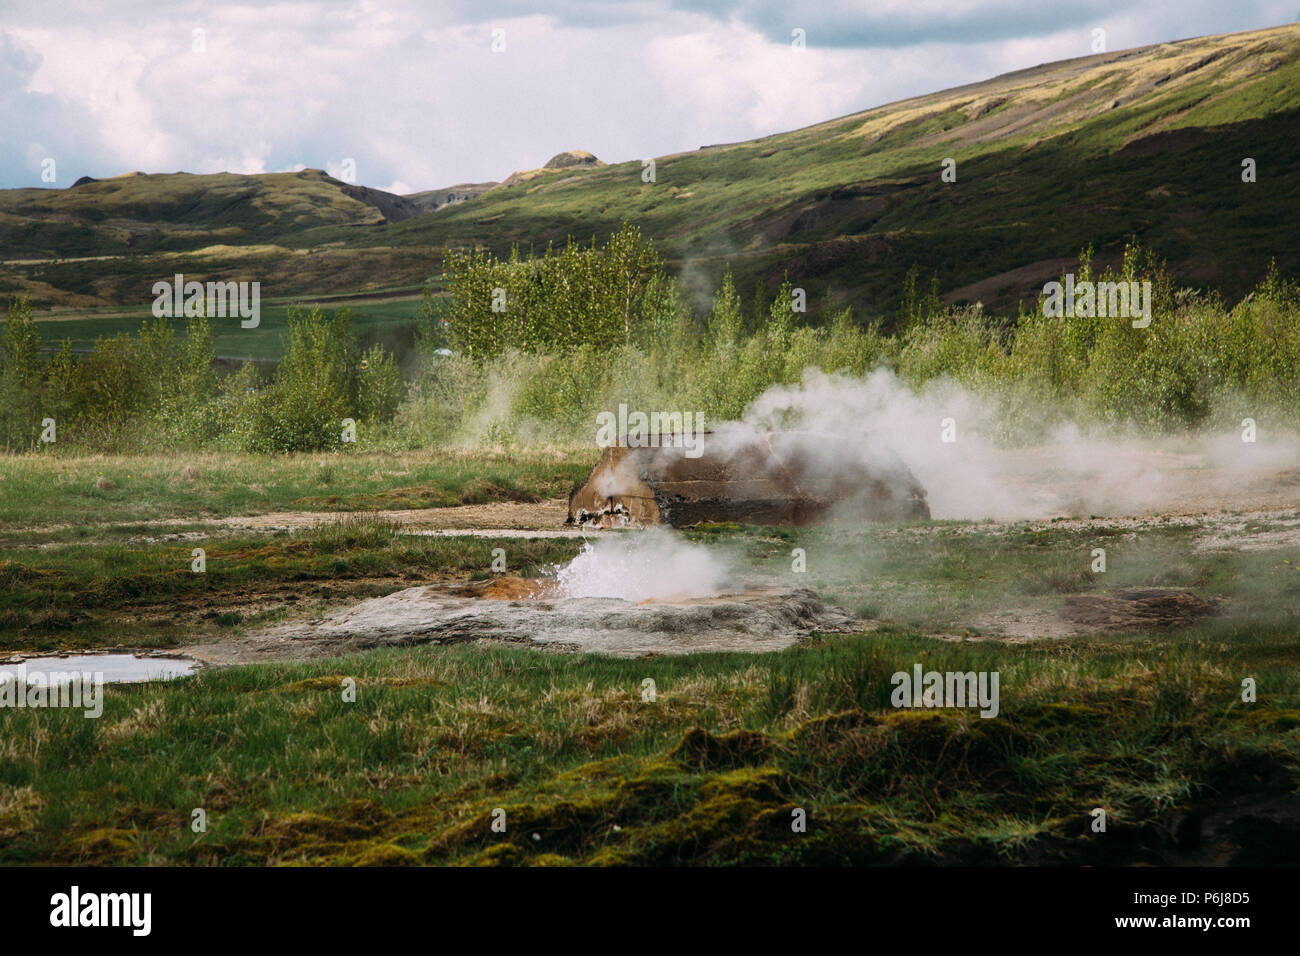 Geyser, surrounded by lush green landscape Stock Photo